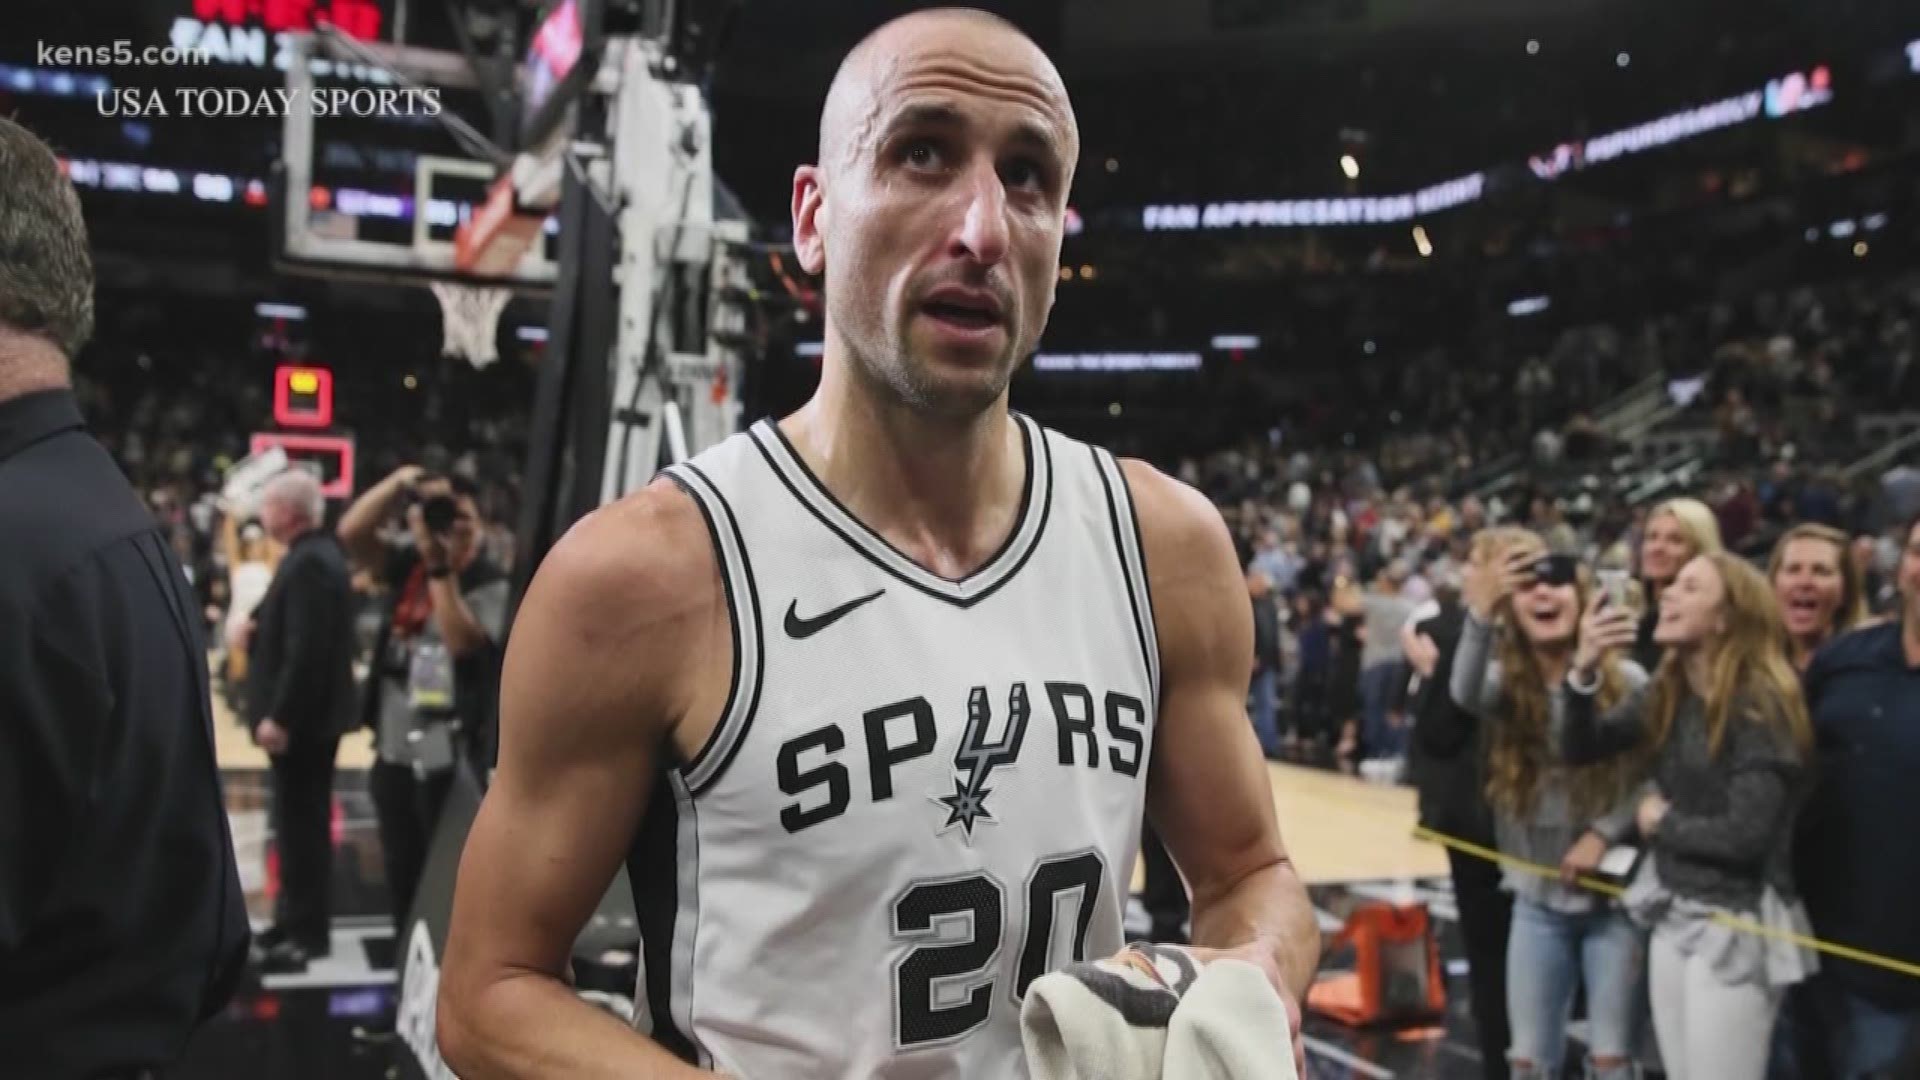 A tribute to Manu Ginobili relentless spirit and passion for the